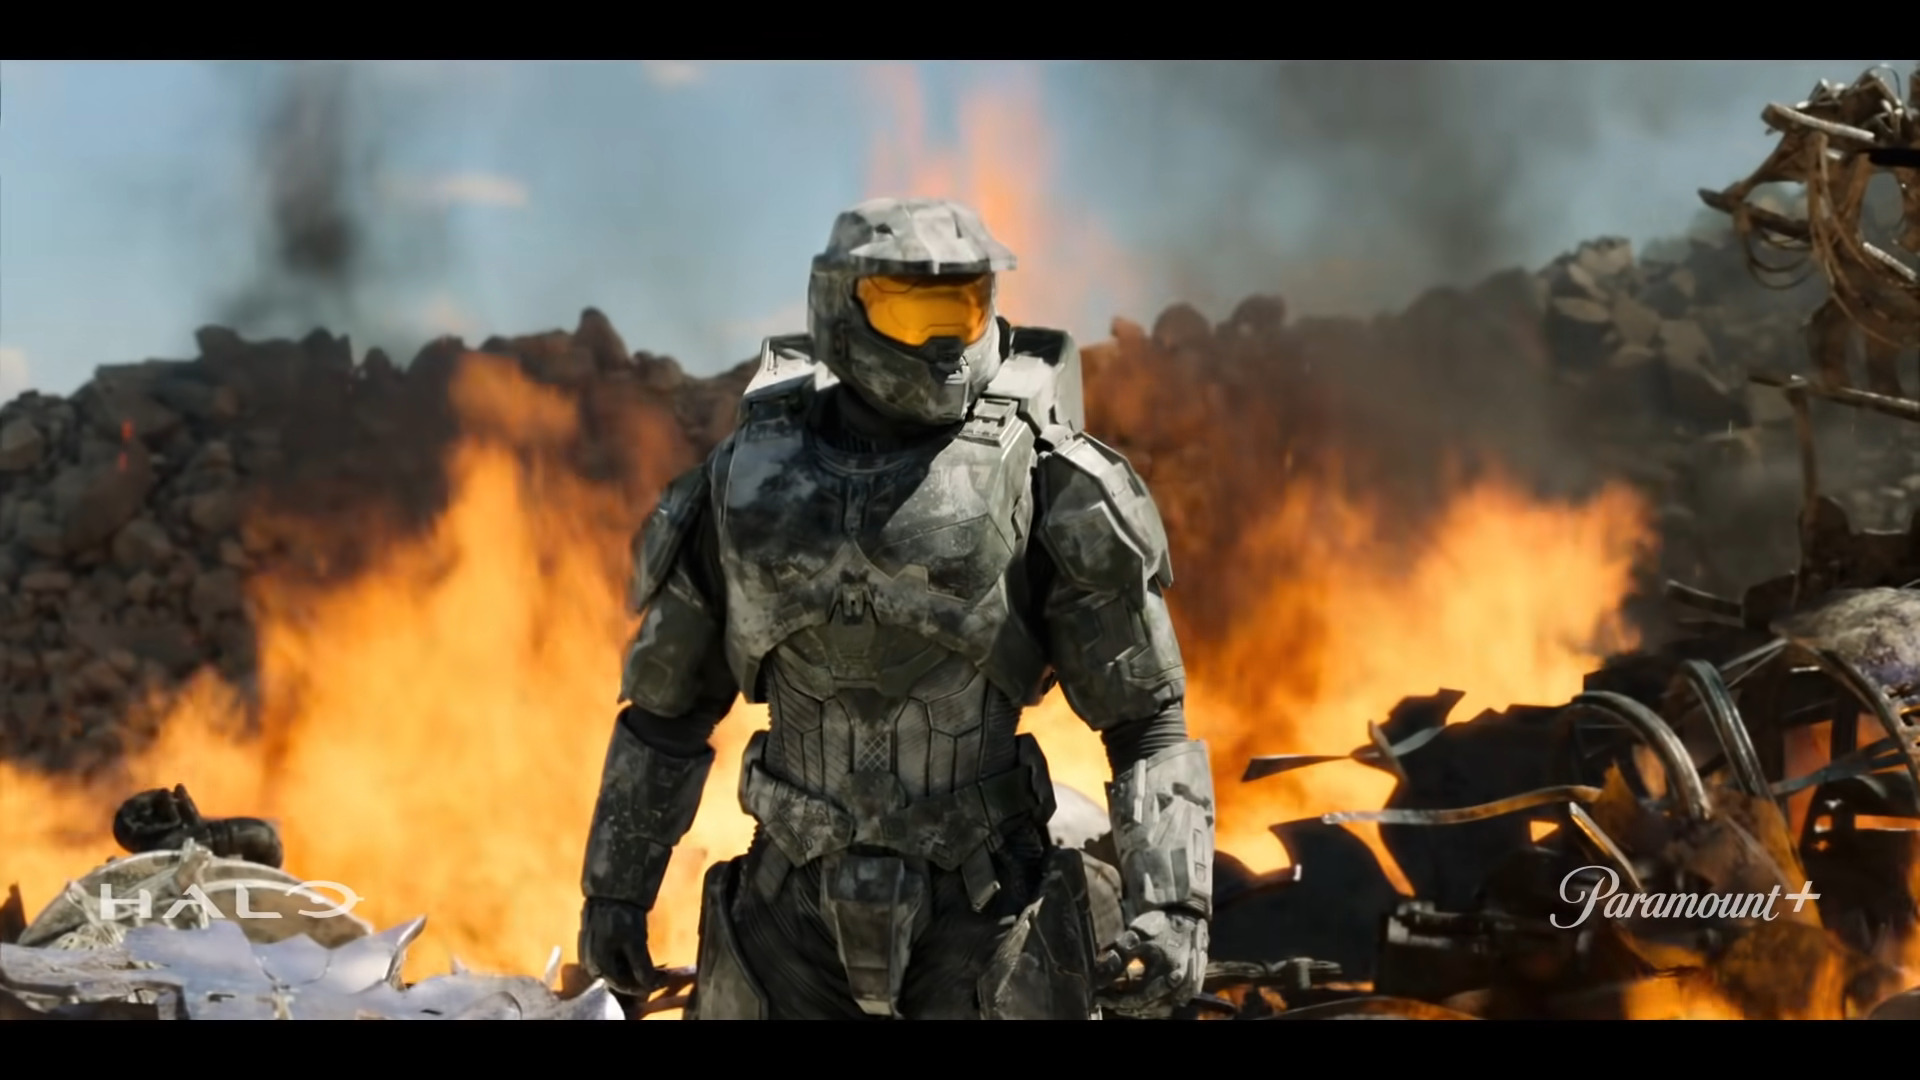 Master Chief To Have Face Revealed In Paramount Plus Live Action Halo